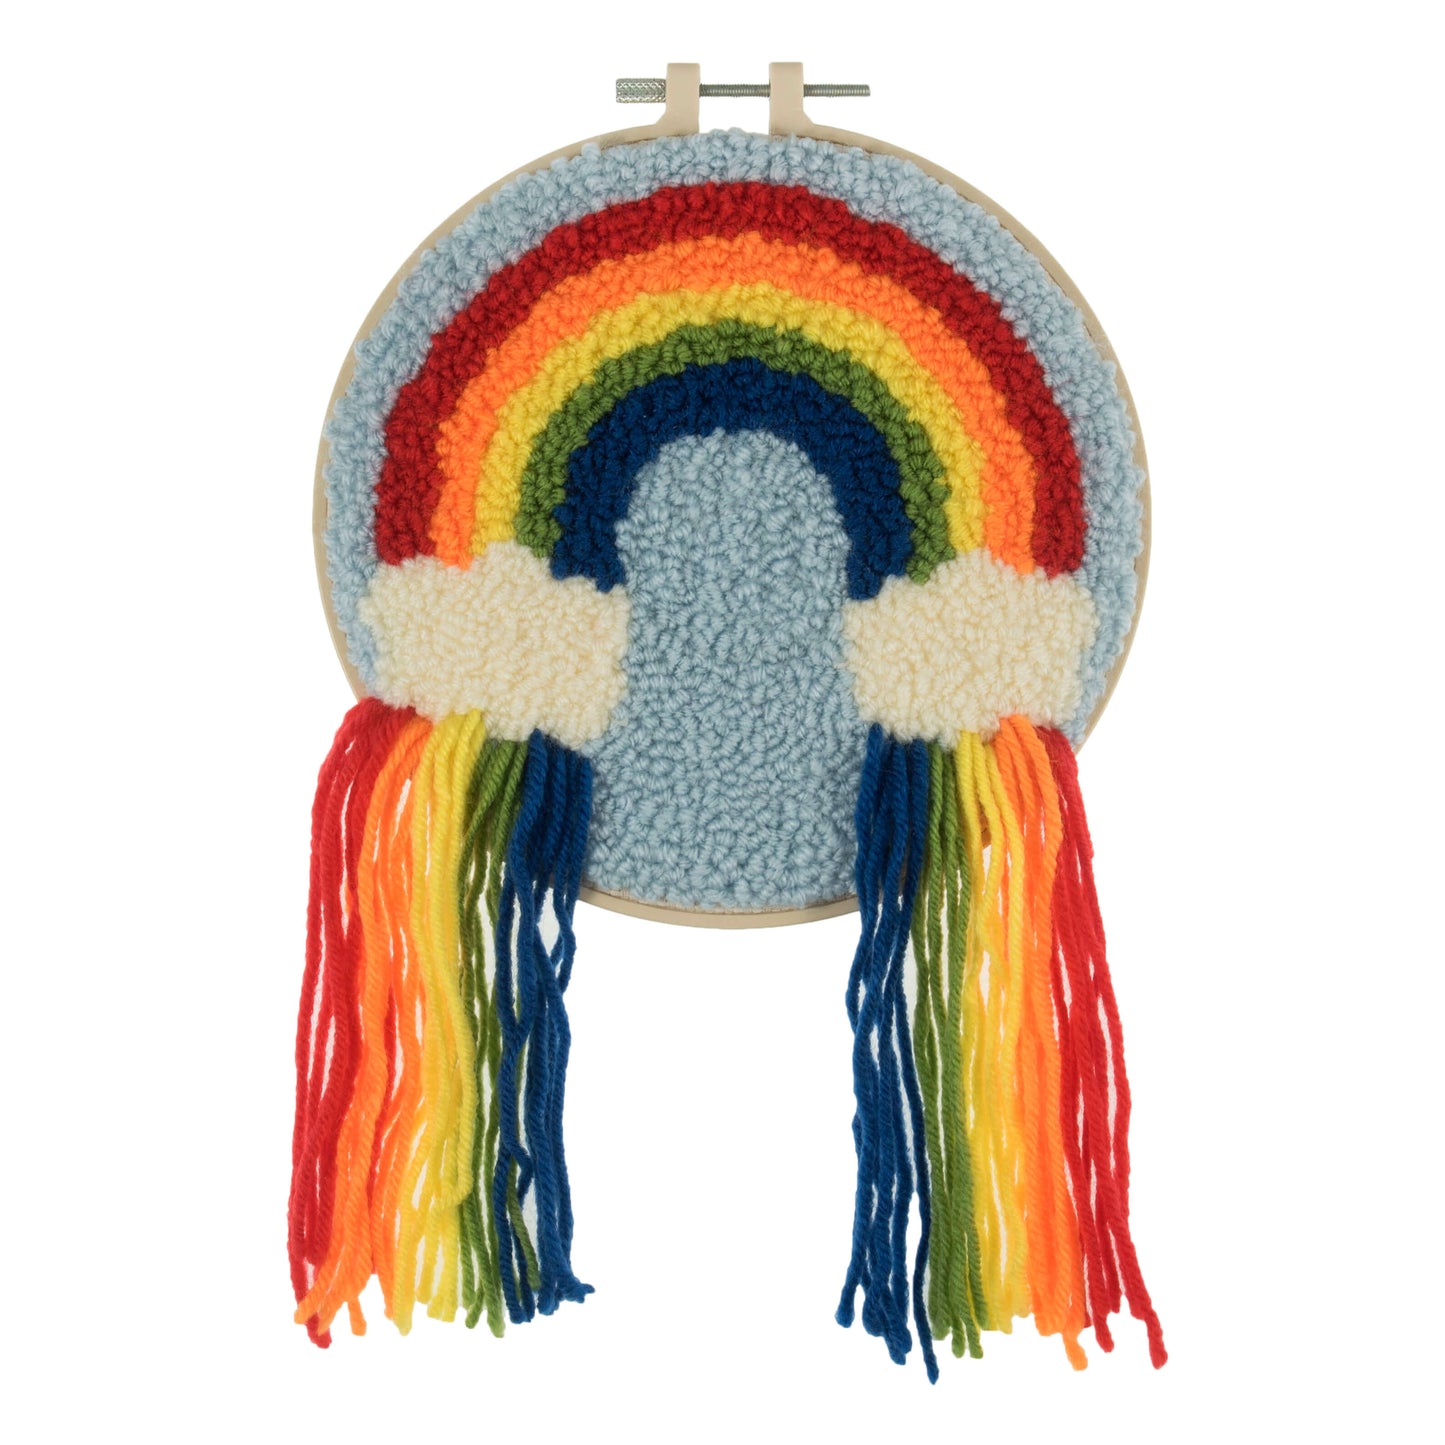 A colorful punch needle embroidery of a rainbow with clouds and raindrops, framed within a wooden embroidery hoop.